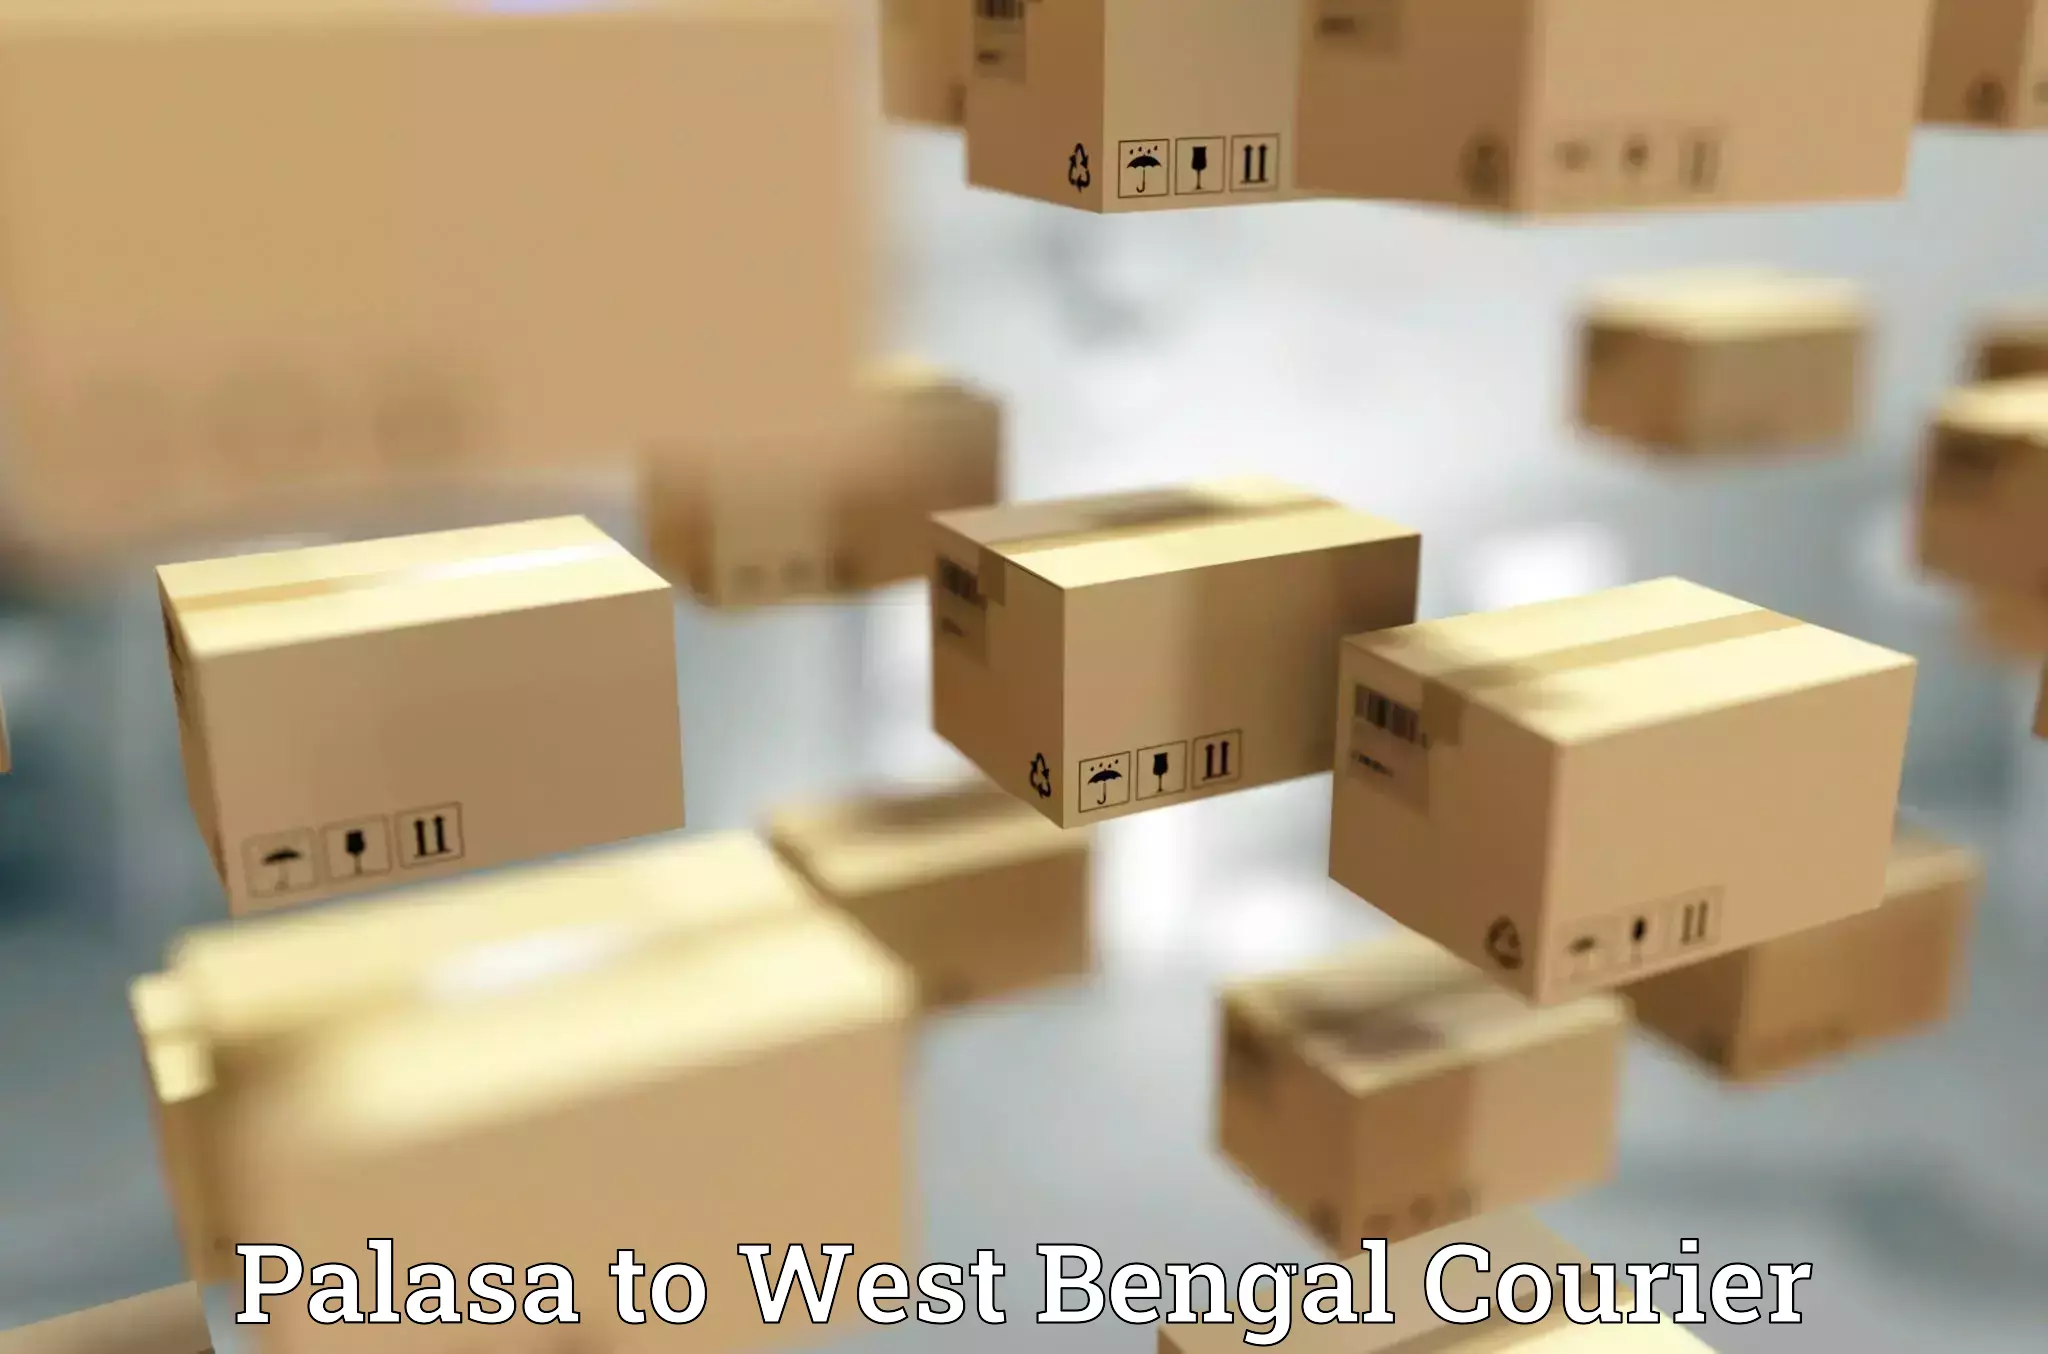 Reliable delivery network Palasa to Haldia port